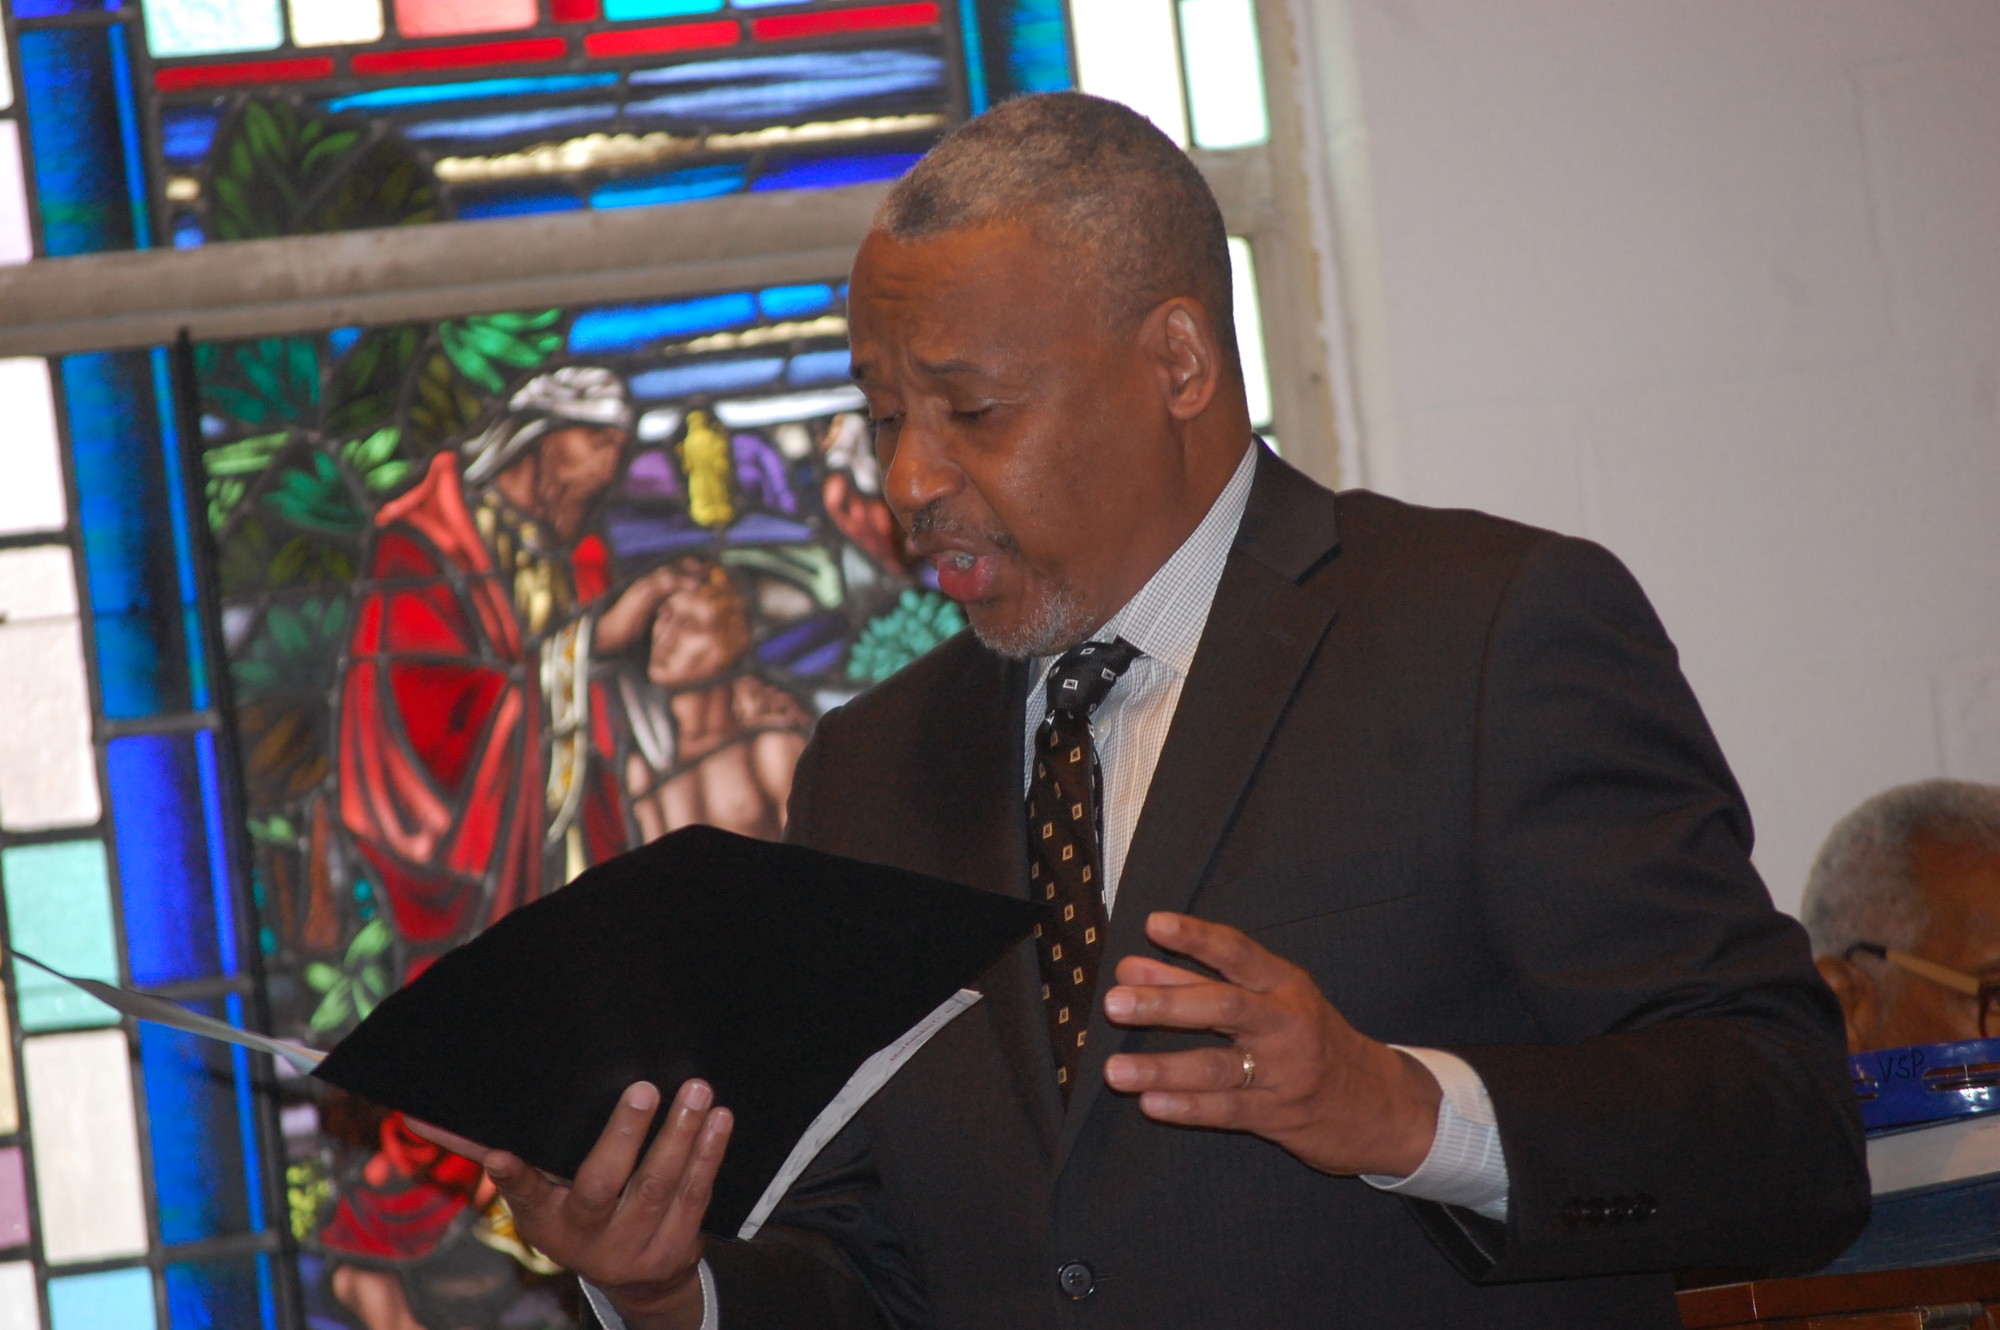 David Mitchell sang “I Have a Dream” at the Valley Stream Religious Council’s third annual Dr. Martin Luther King Day celebration on Monday.